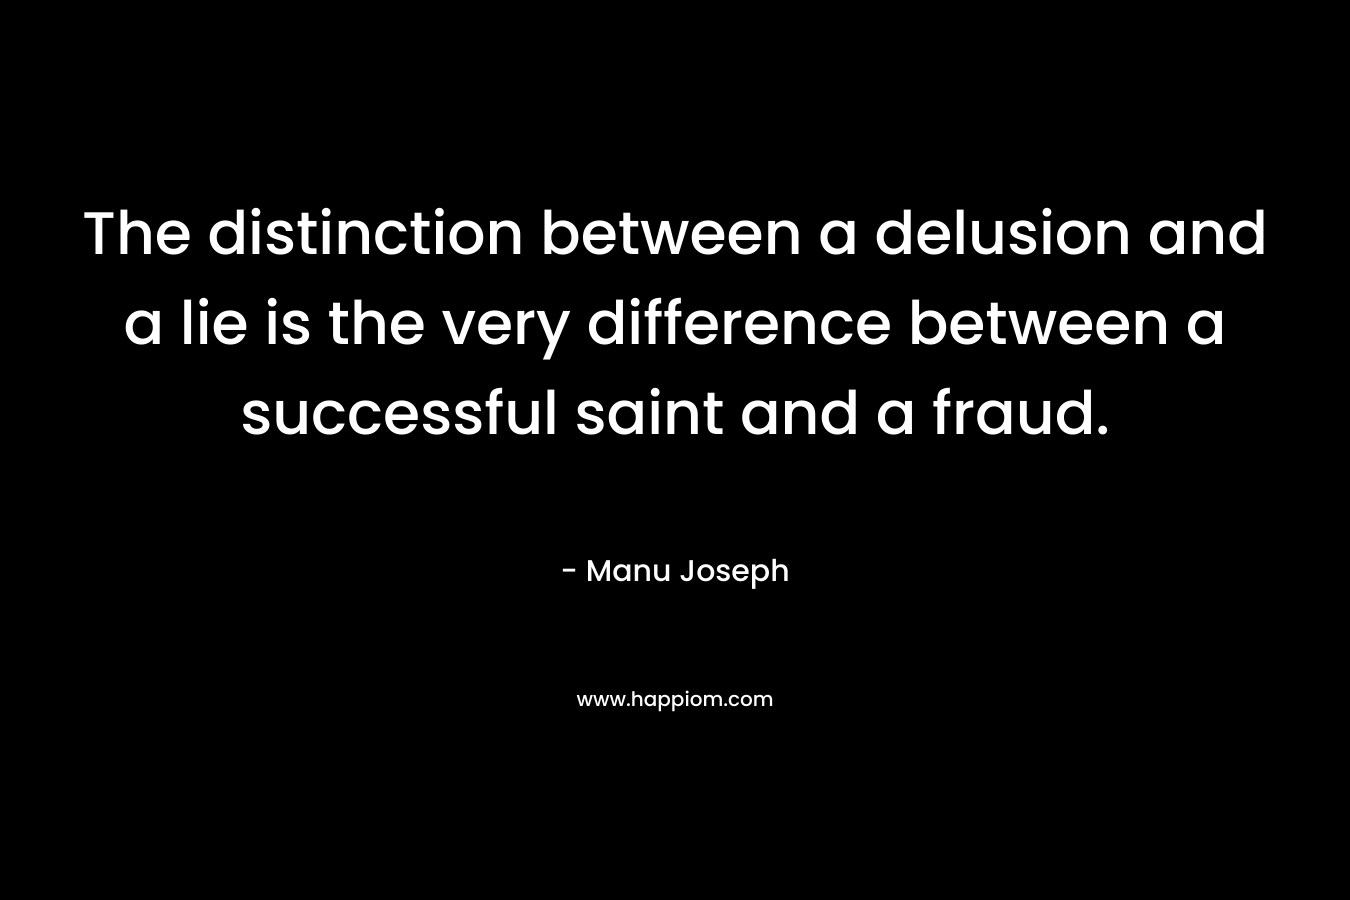 The distinction between a delusion and a lie is the very difference between a successful saint and a fraud.